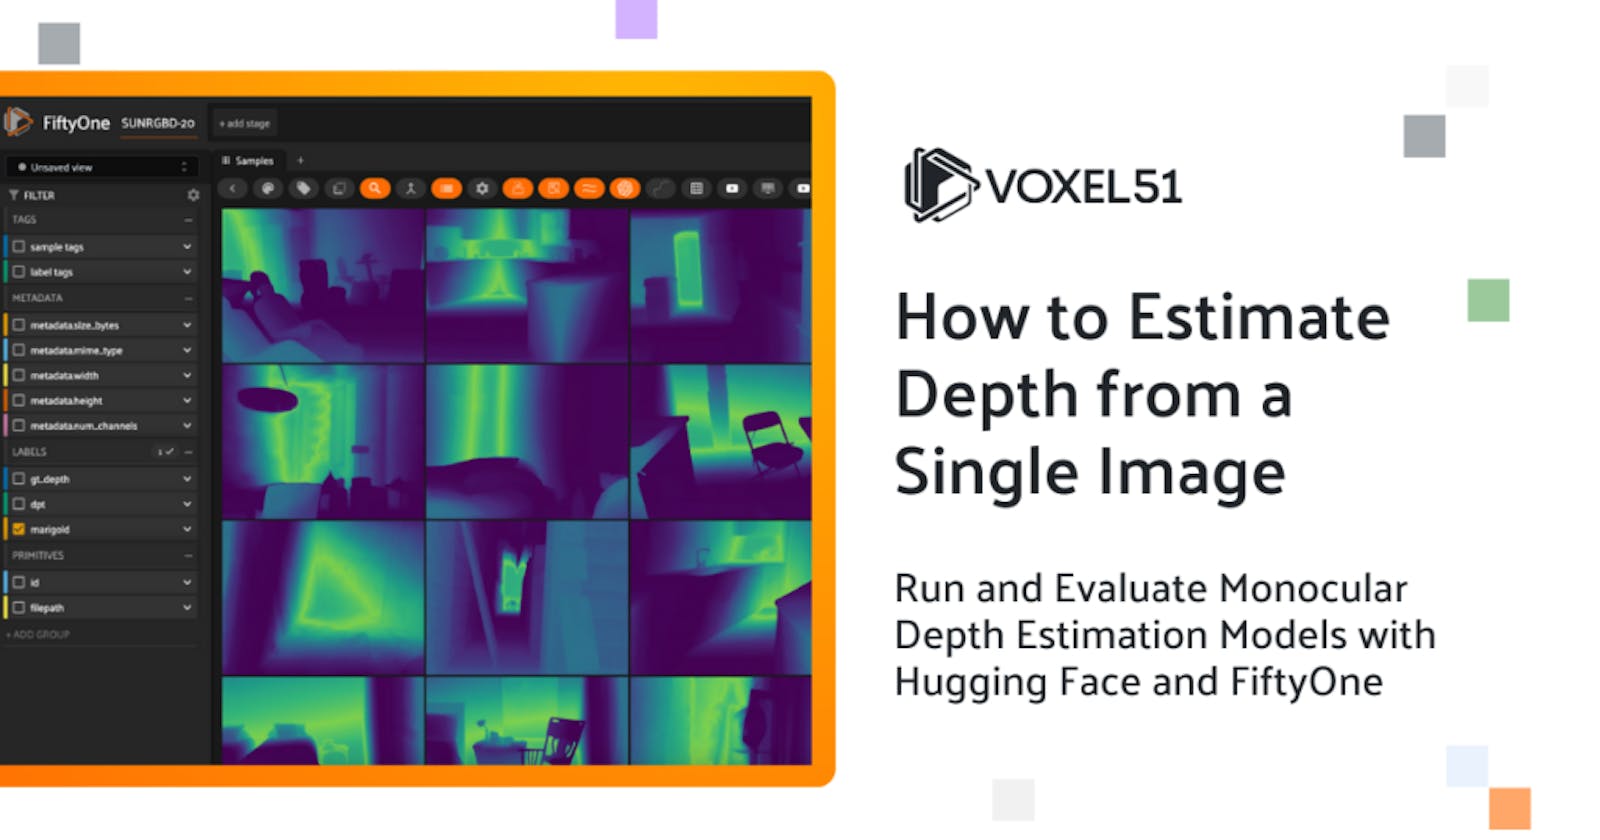 How to Estimate Depth from a Single Image